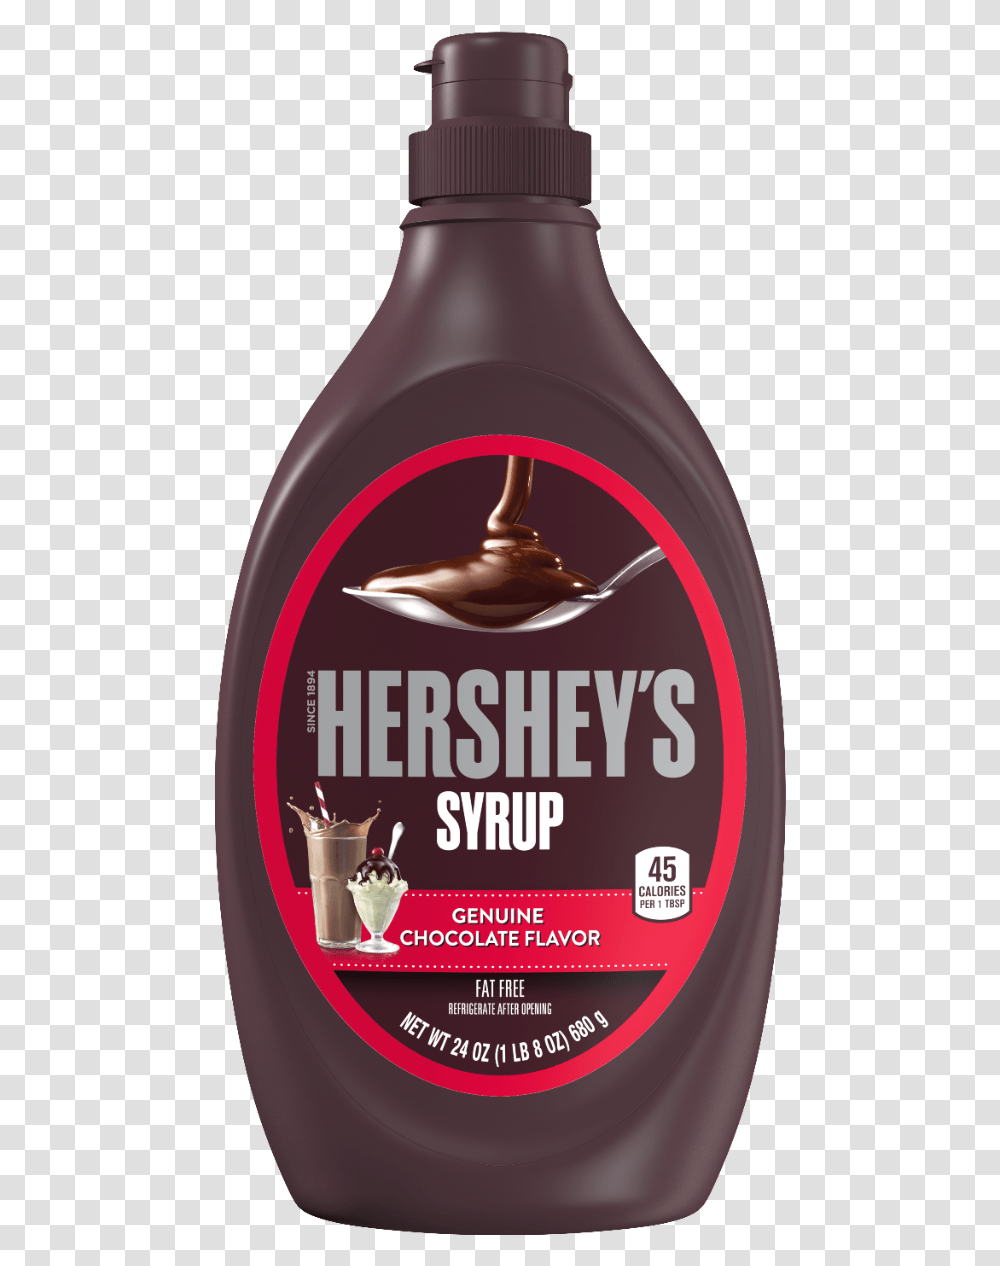 Hershey Chocolate Syrup Nutrition Facts Download Bottle, Label, Beverage, Advertisement Transparent Png